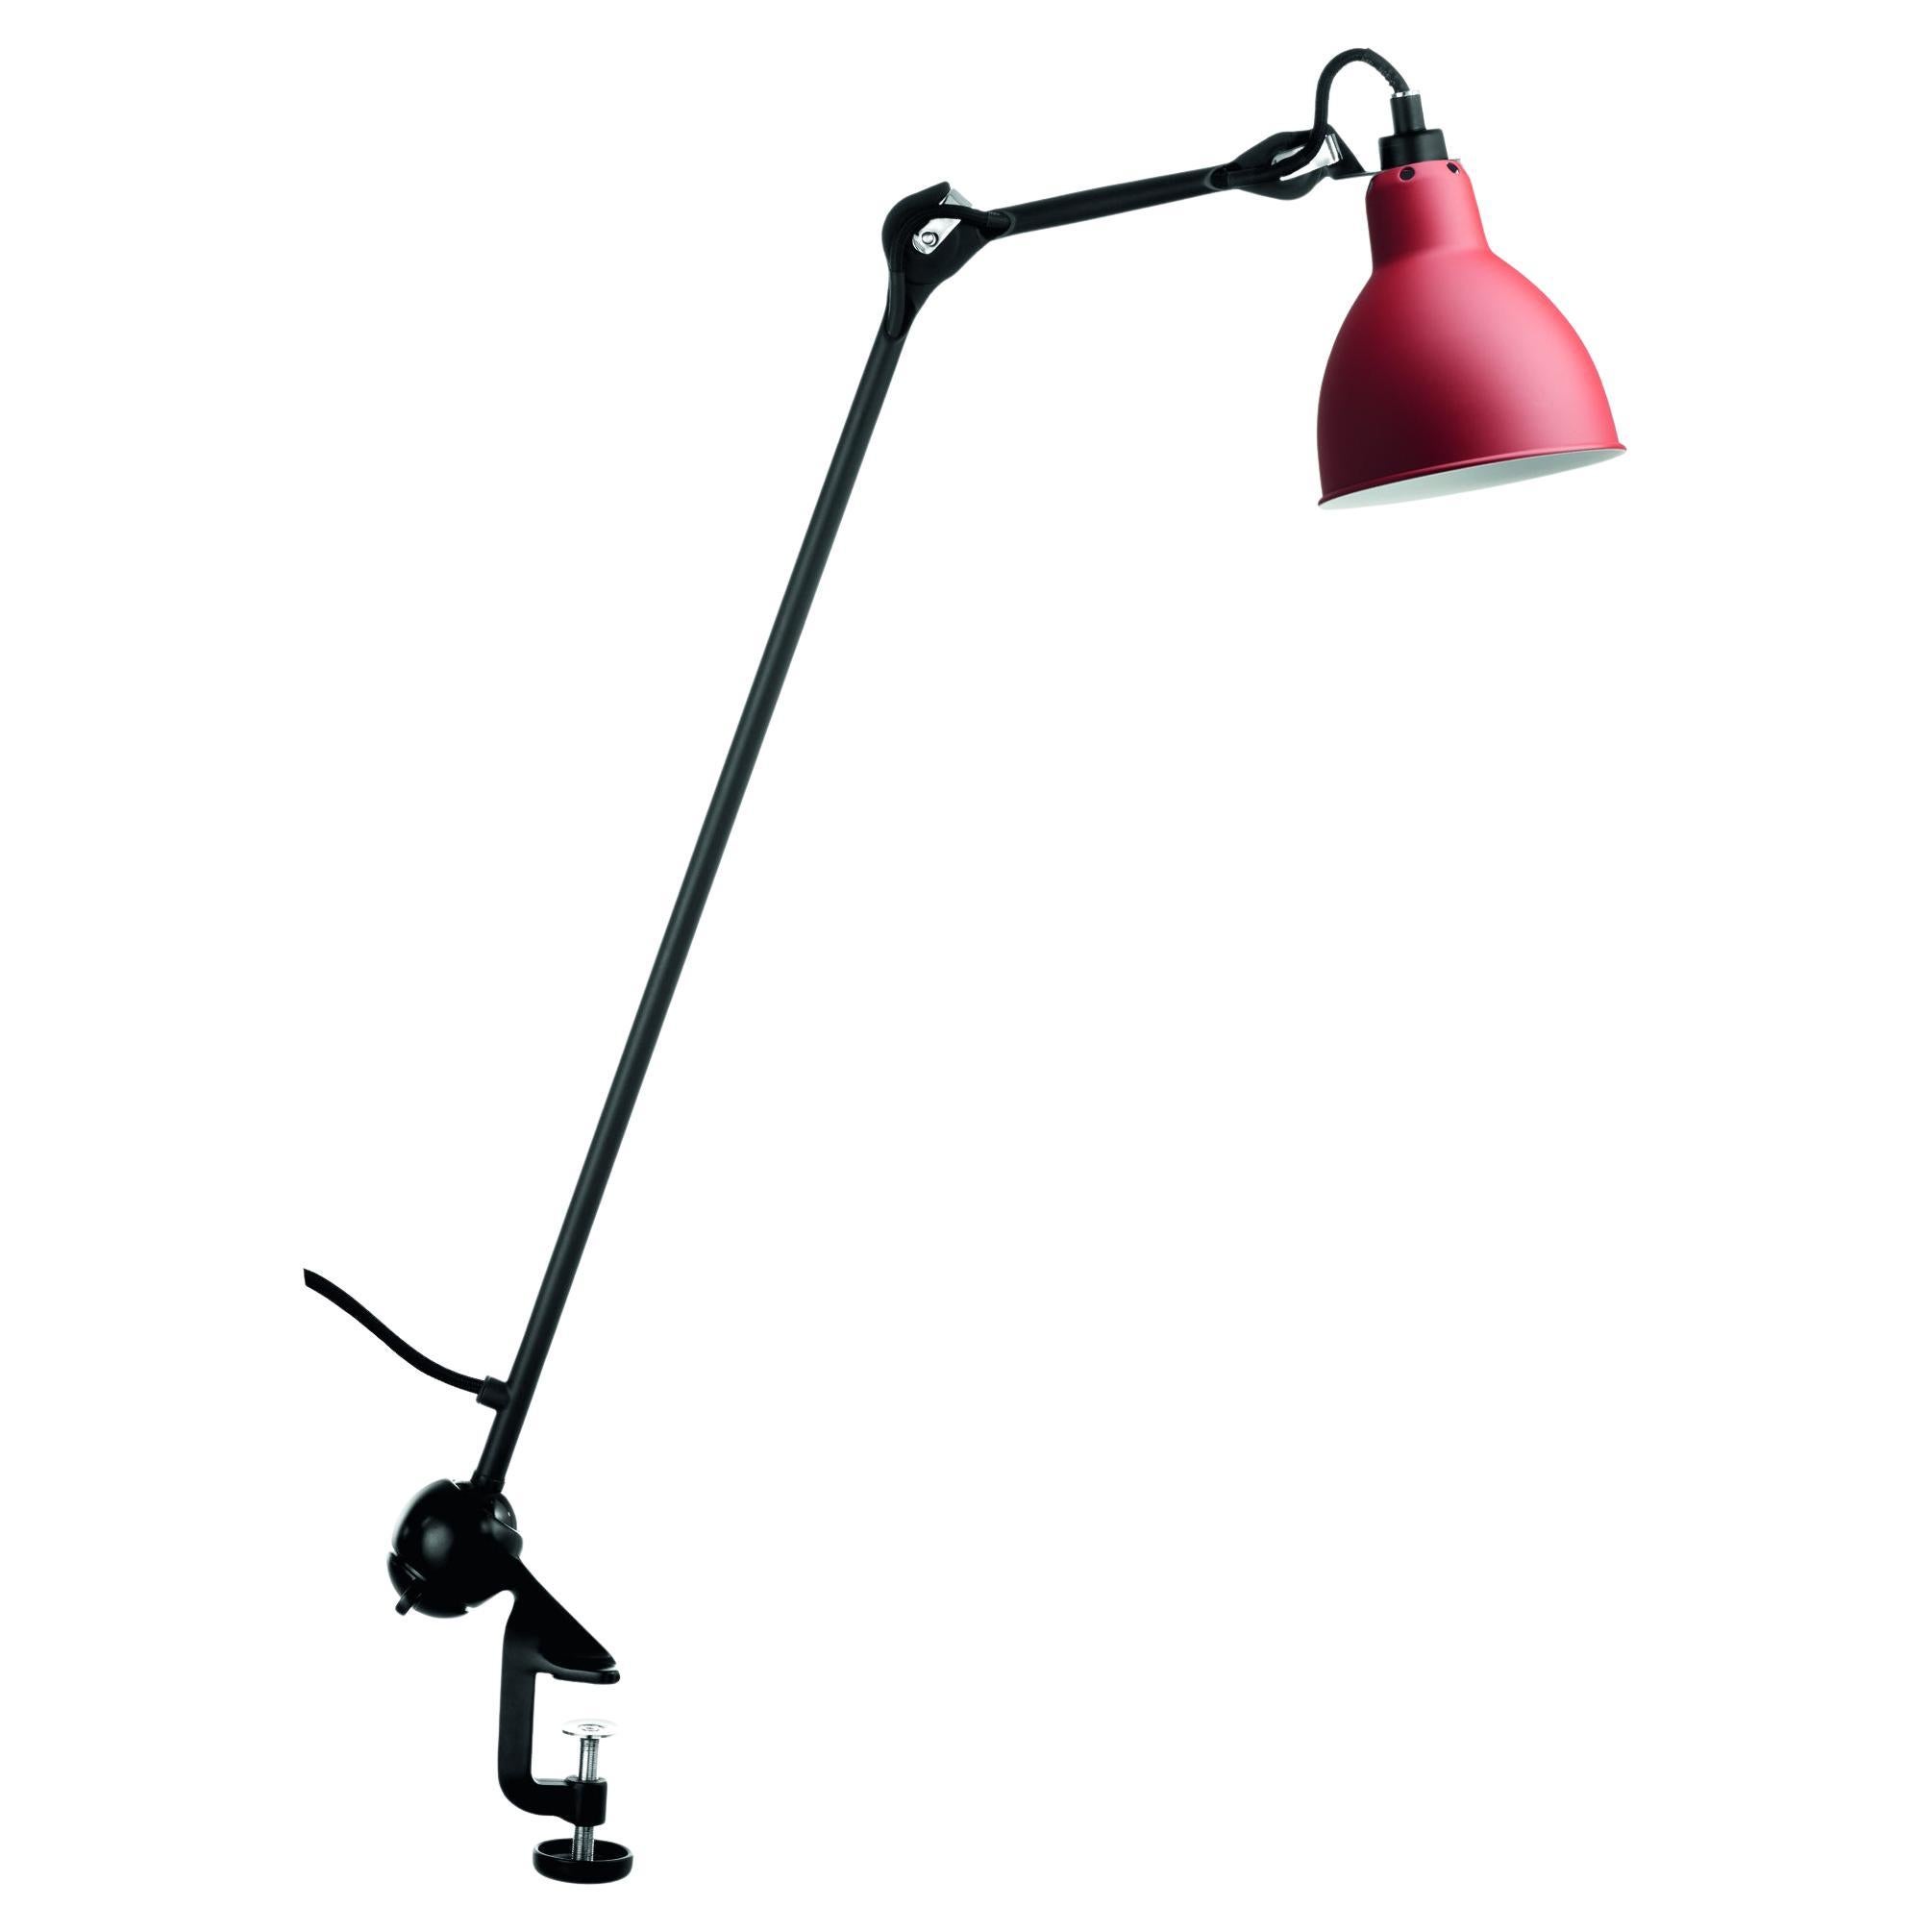 DCW Editions La Lampe Gras N°201 Round Table Lamp in Black Arm and Red Shade